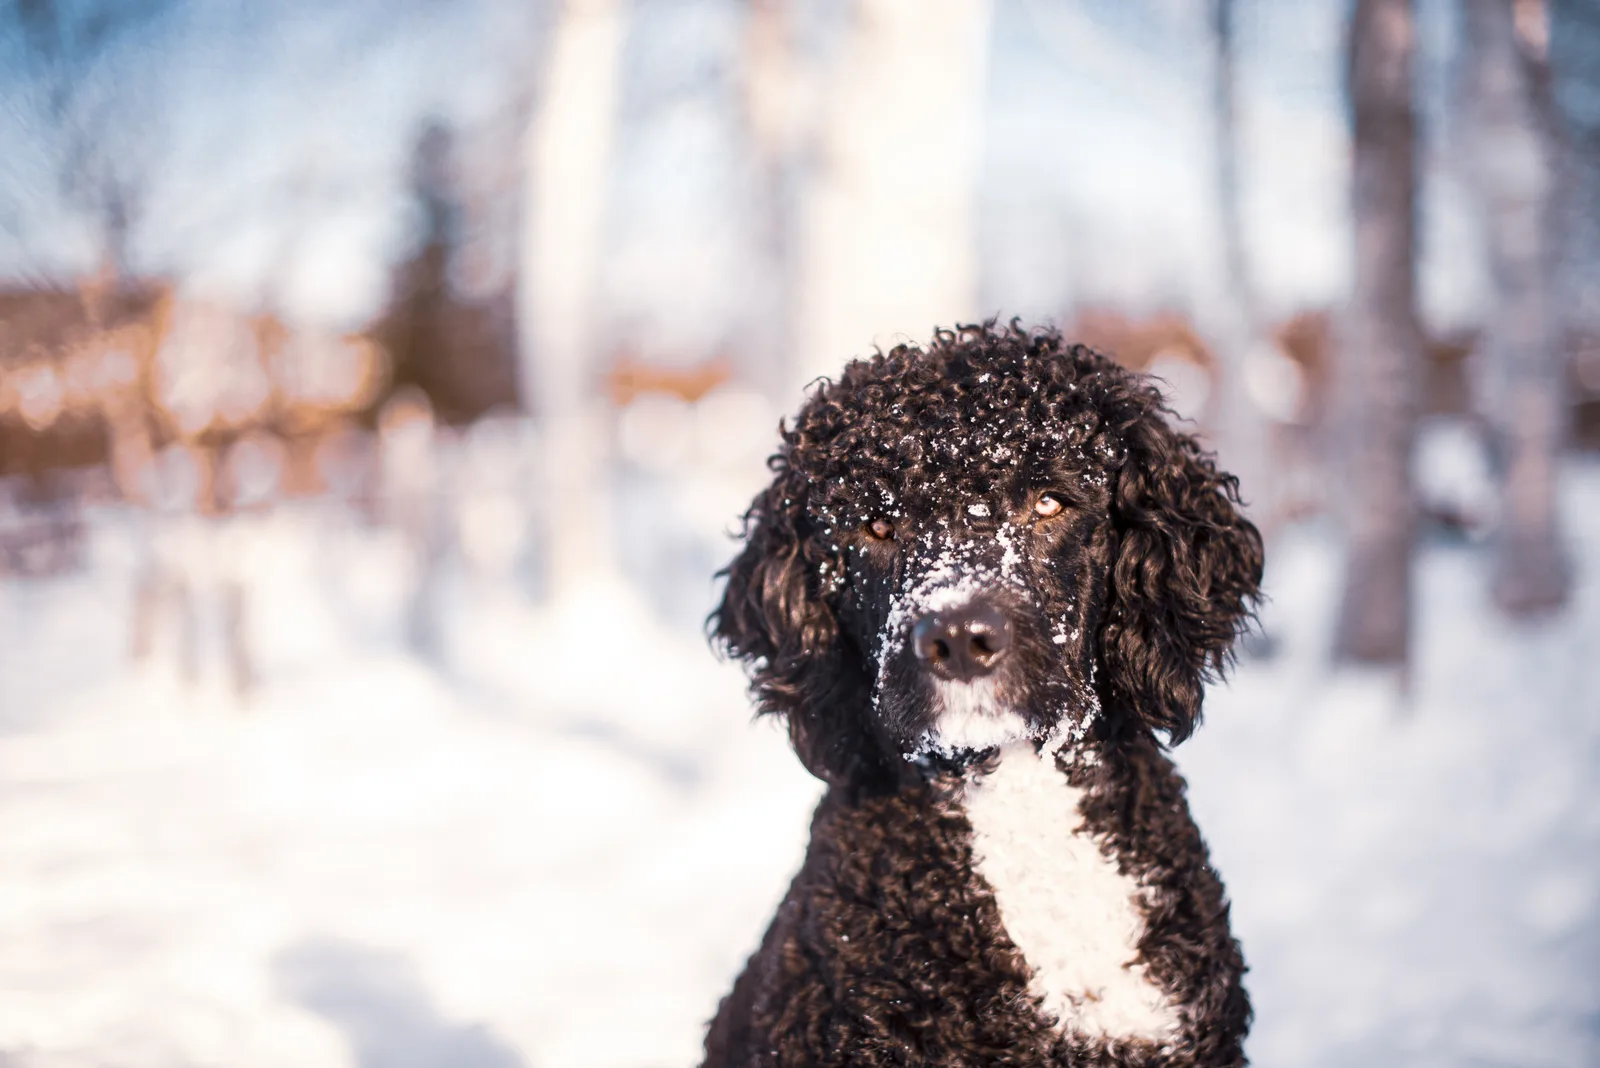 Portuguese Water Dog playing outside in the snow in winter